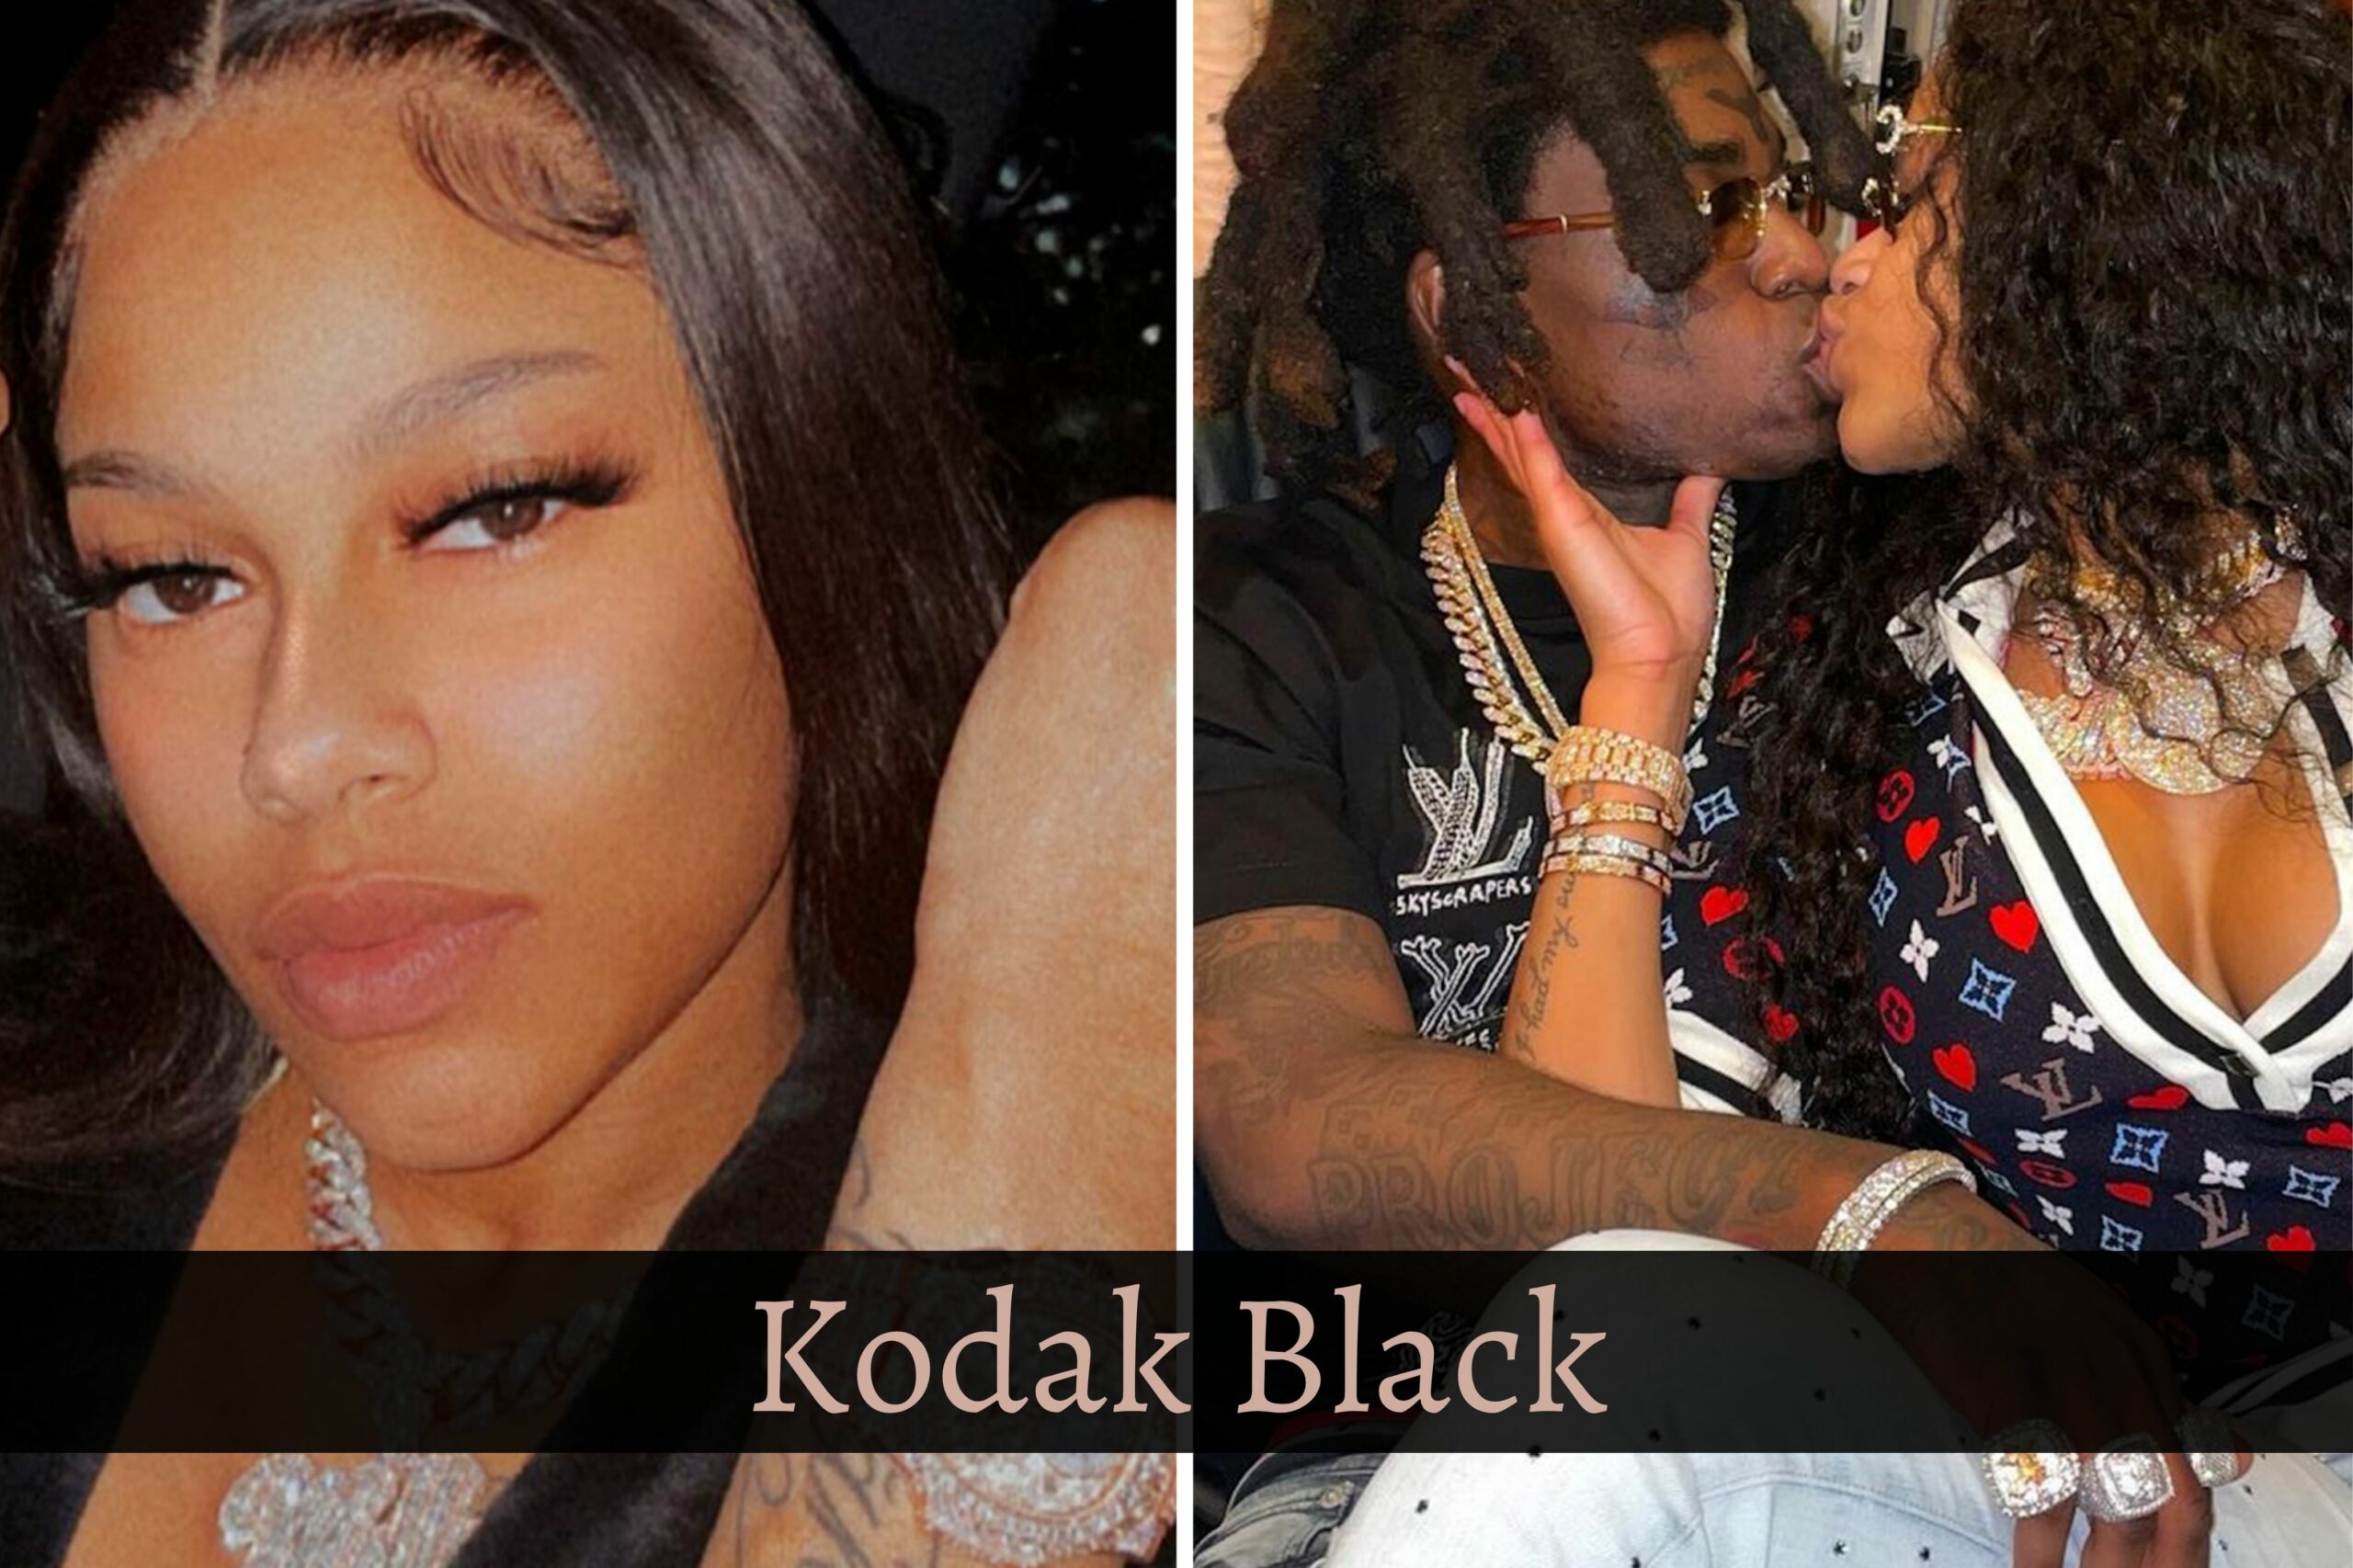 Who Is Kodak Black Dating Now? Is He Really Engaged With Mellow Rackz?